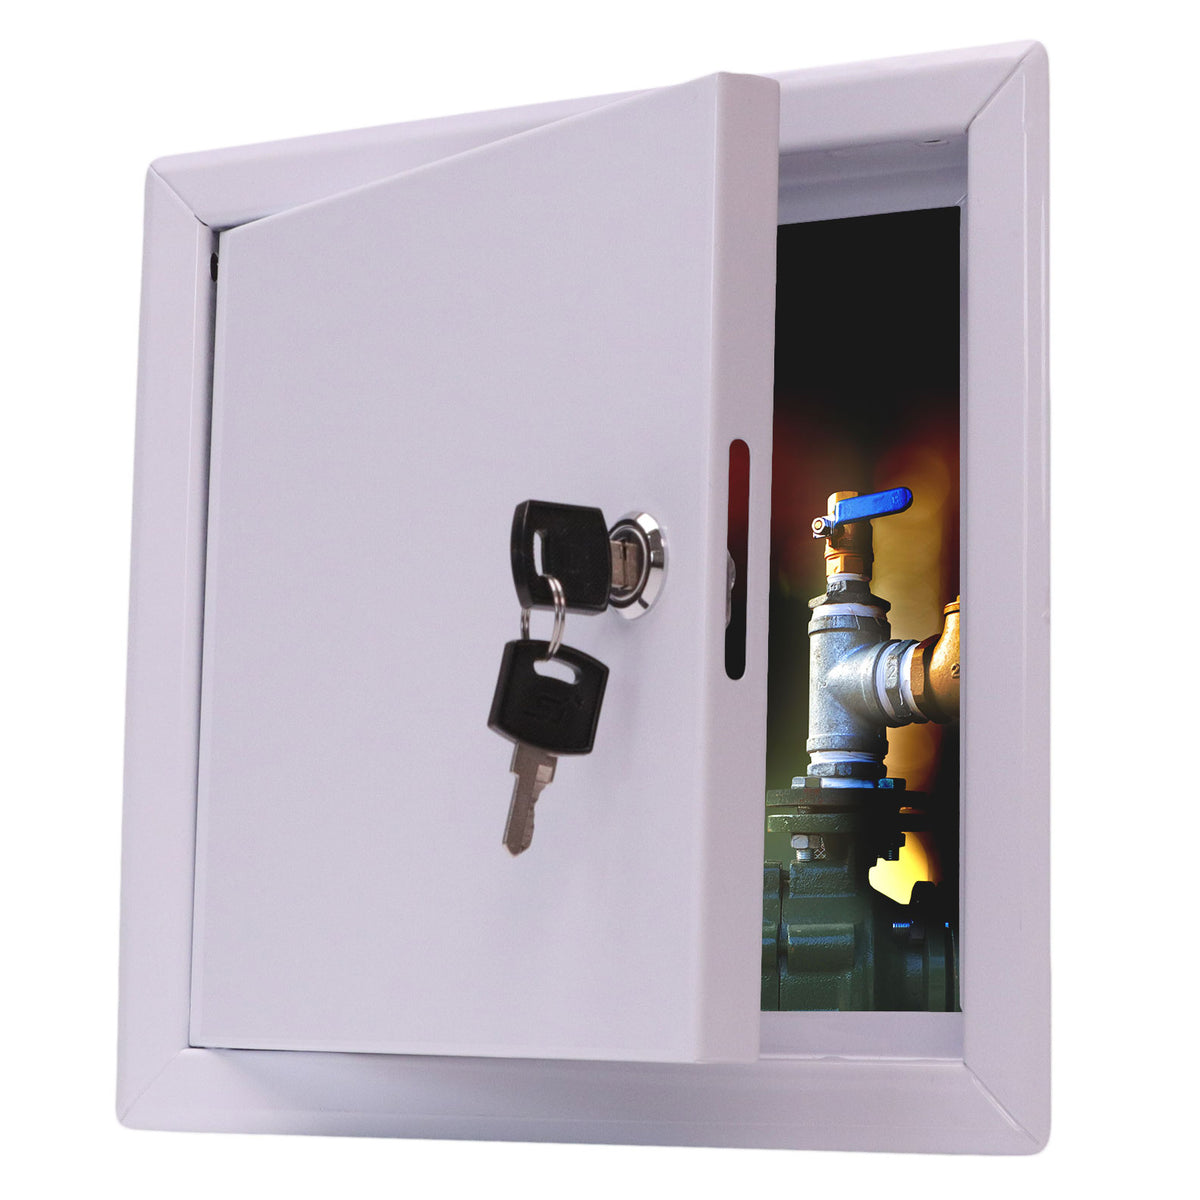 10&quot; X 10&quot; Steel Access Panel Removable Door For Wall / Ceiling Application (Lock and Key) With Frame - [Outer Dimensions: 11&quot; Width X 11&quot; Height]